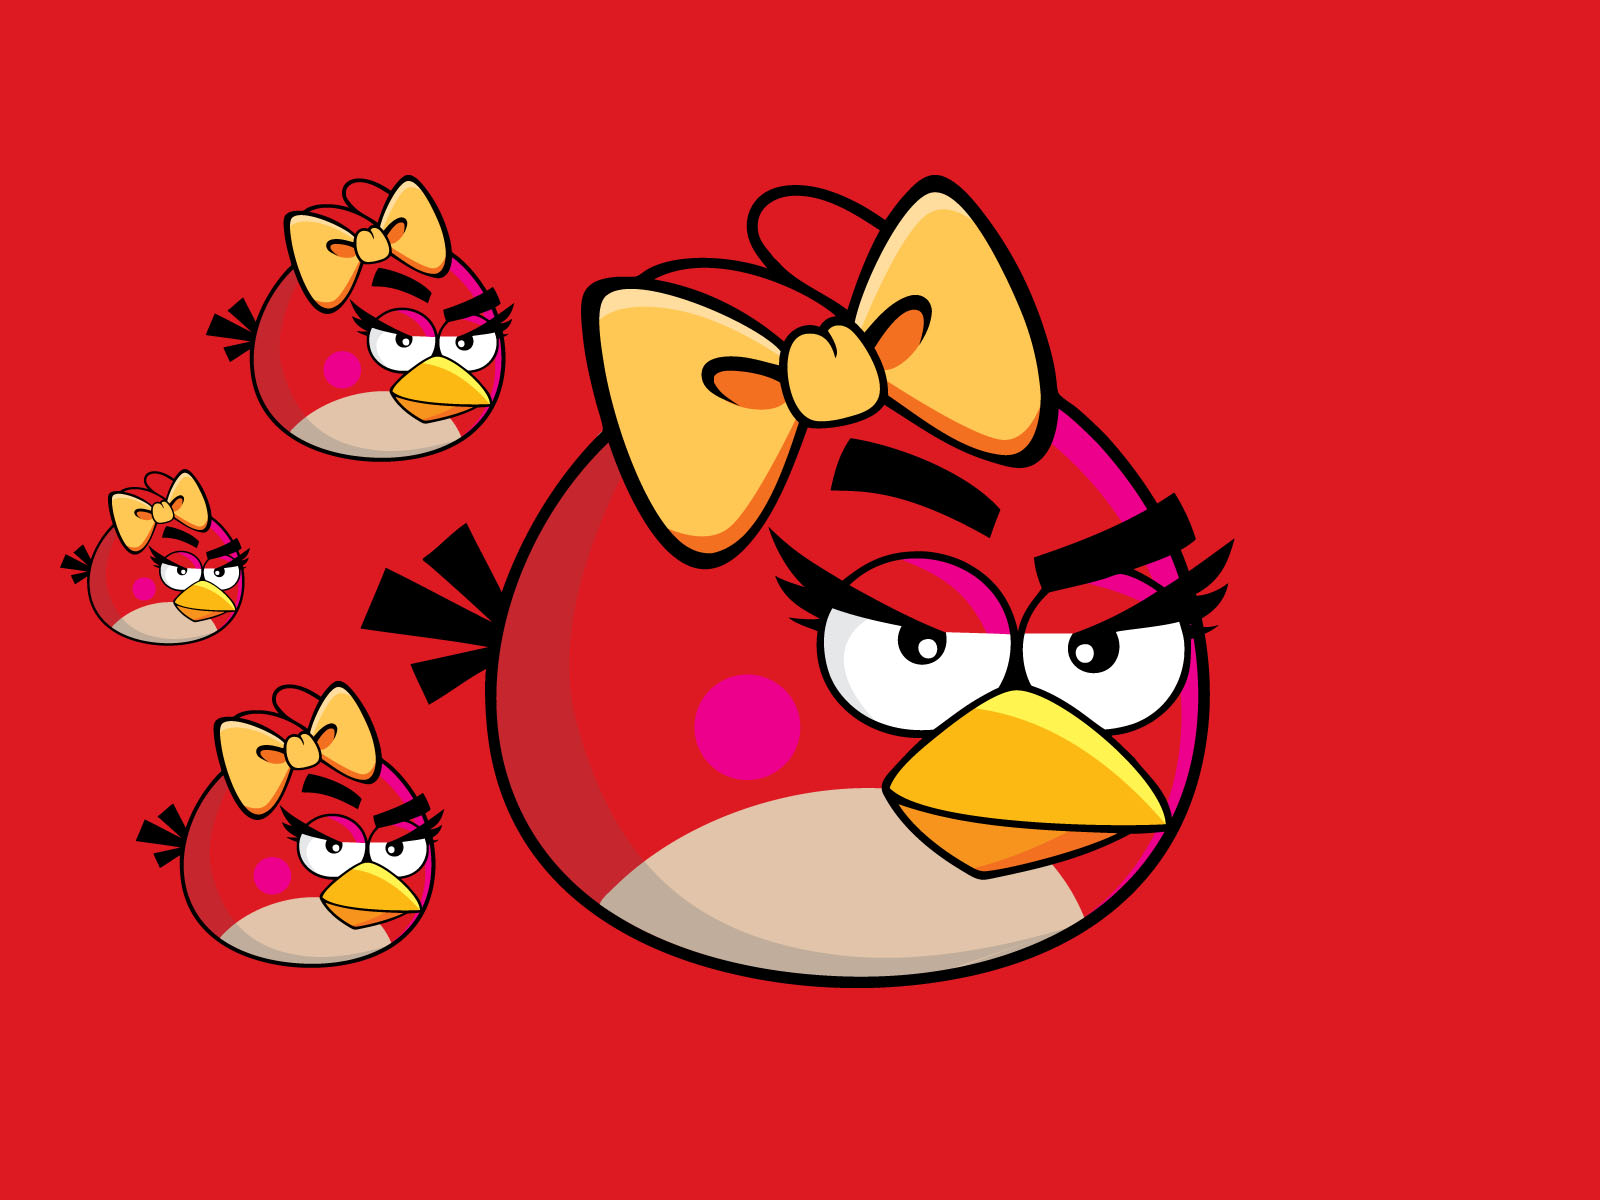 Red Angry Bird Wallpaper #6807630